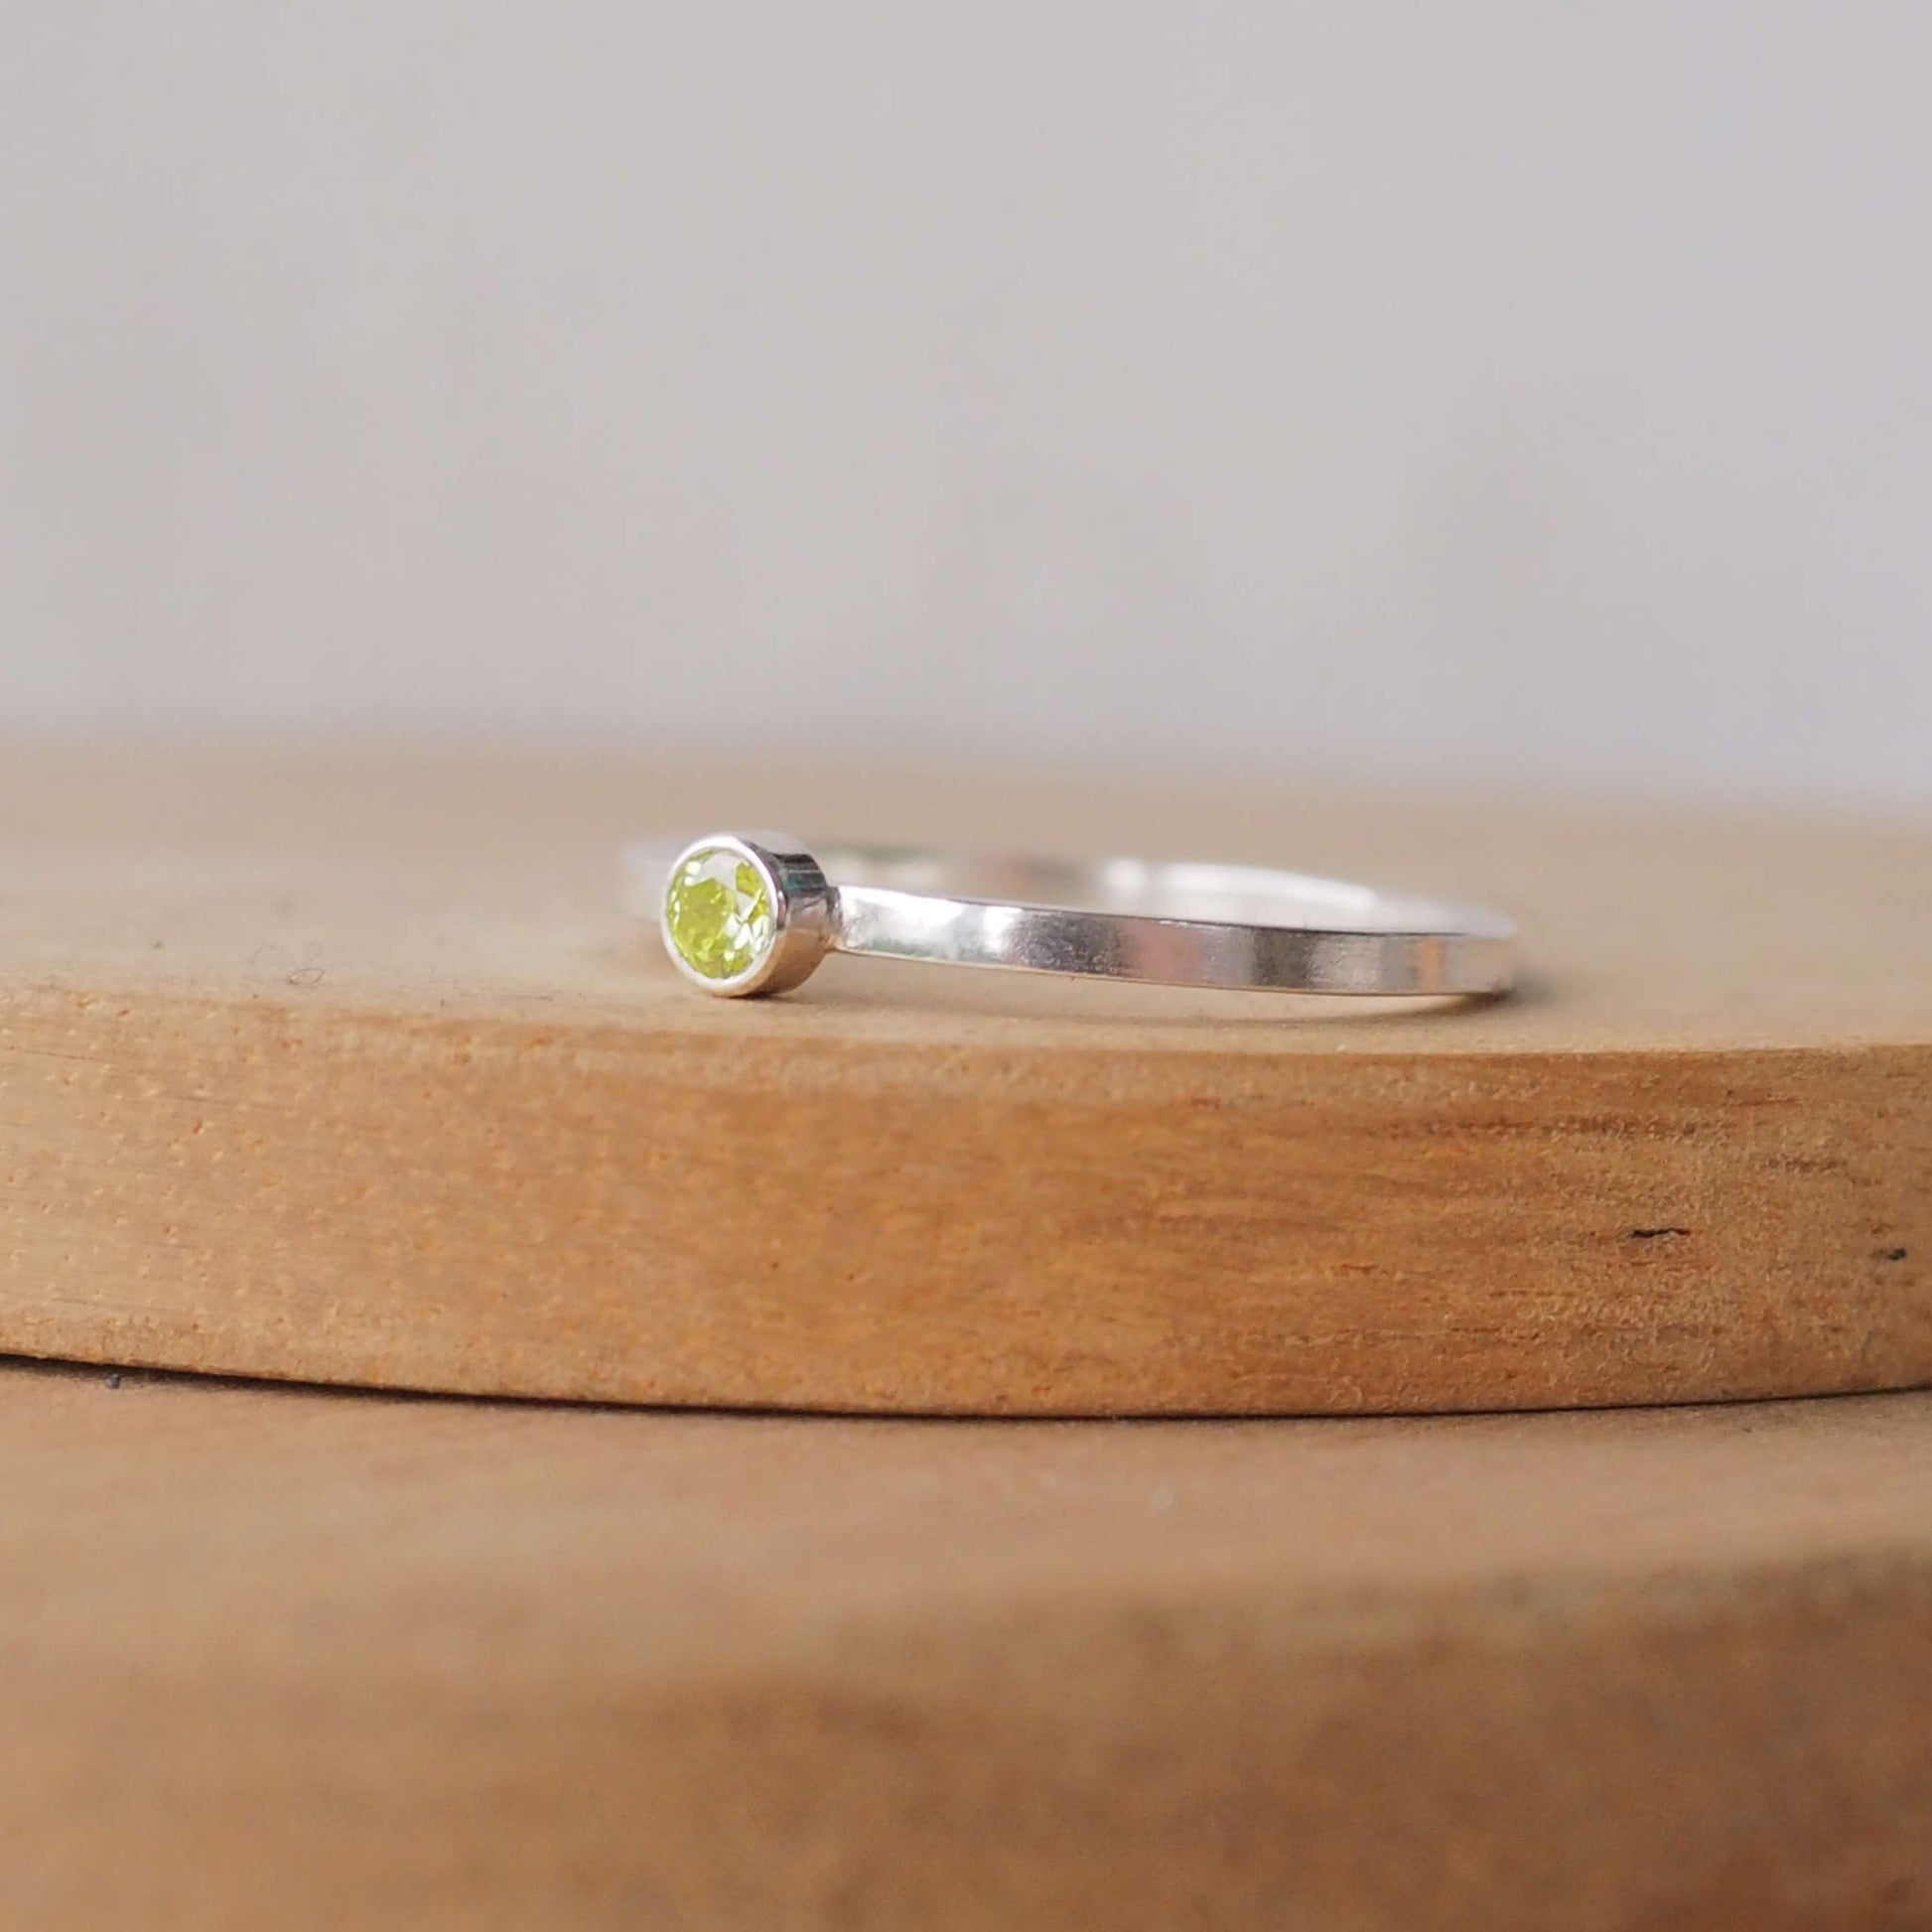 Silver ring with a moss green gemstone. The ring is simple in style with no embellishment , with a round wire band 1.5mm thick with a simple light green Peridot 3mm round cubic zirconia stone set in an enclosed silver setting. Peridot is birthstone for August. The ring is Sterling Silver and made to your ring size. Handmade in Scotland by Maram Jewellery